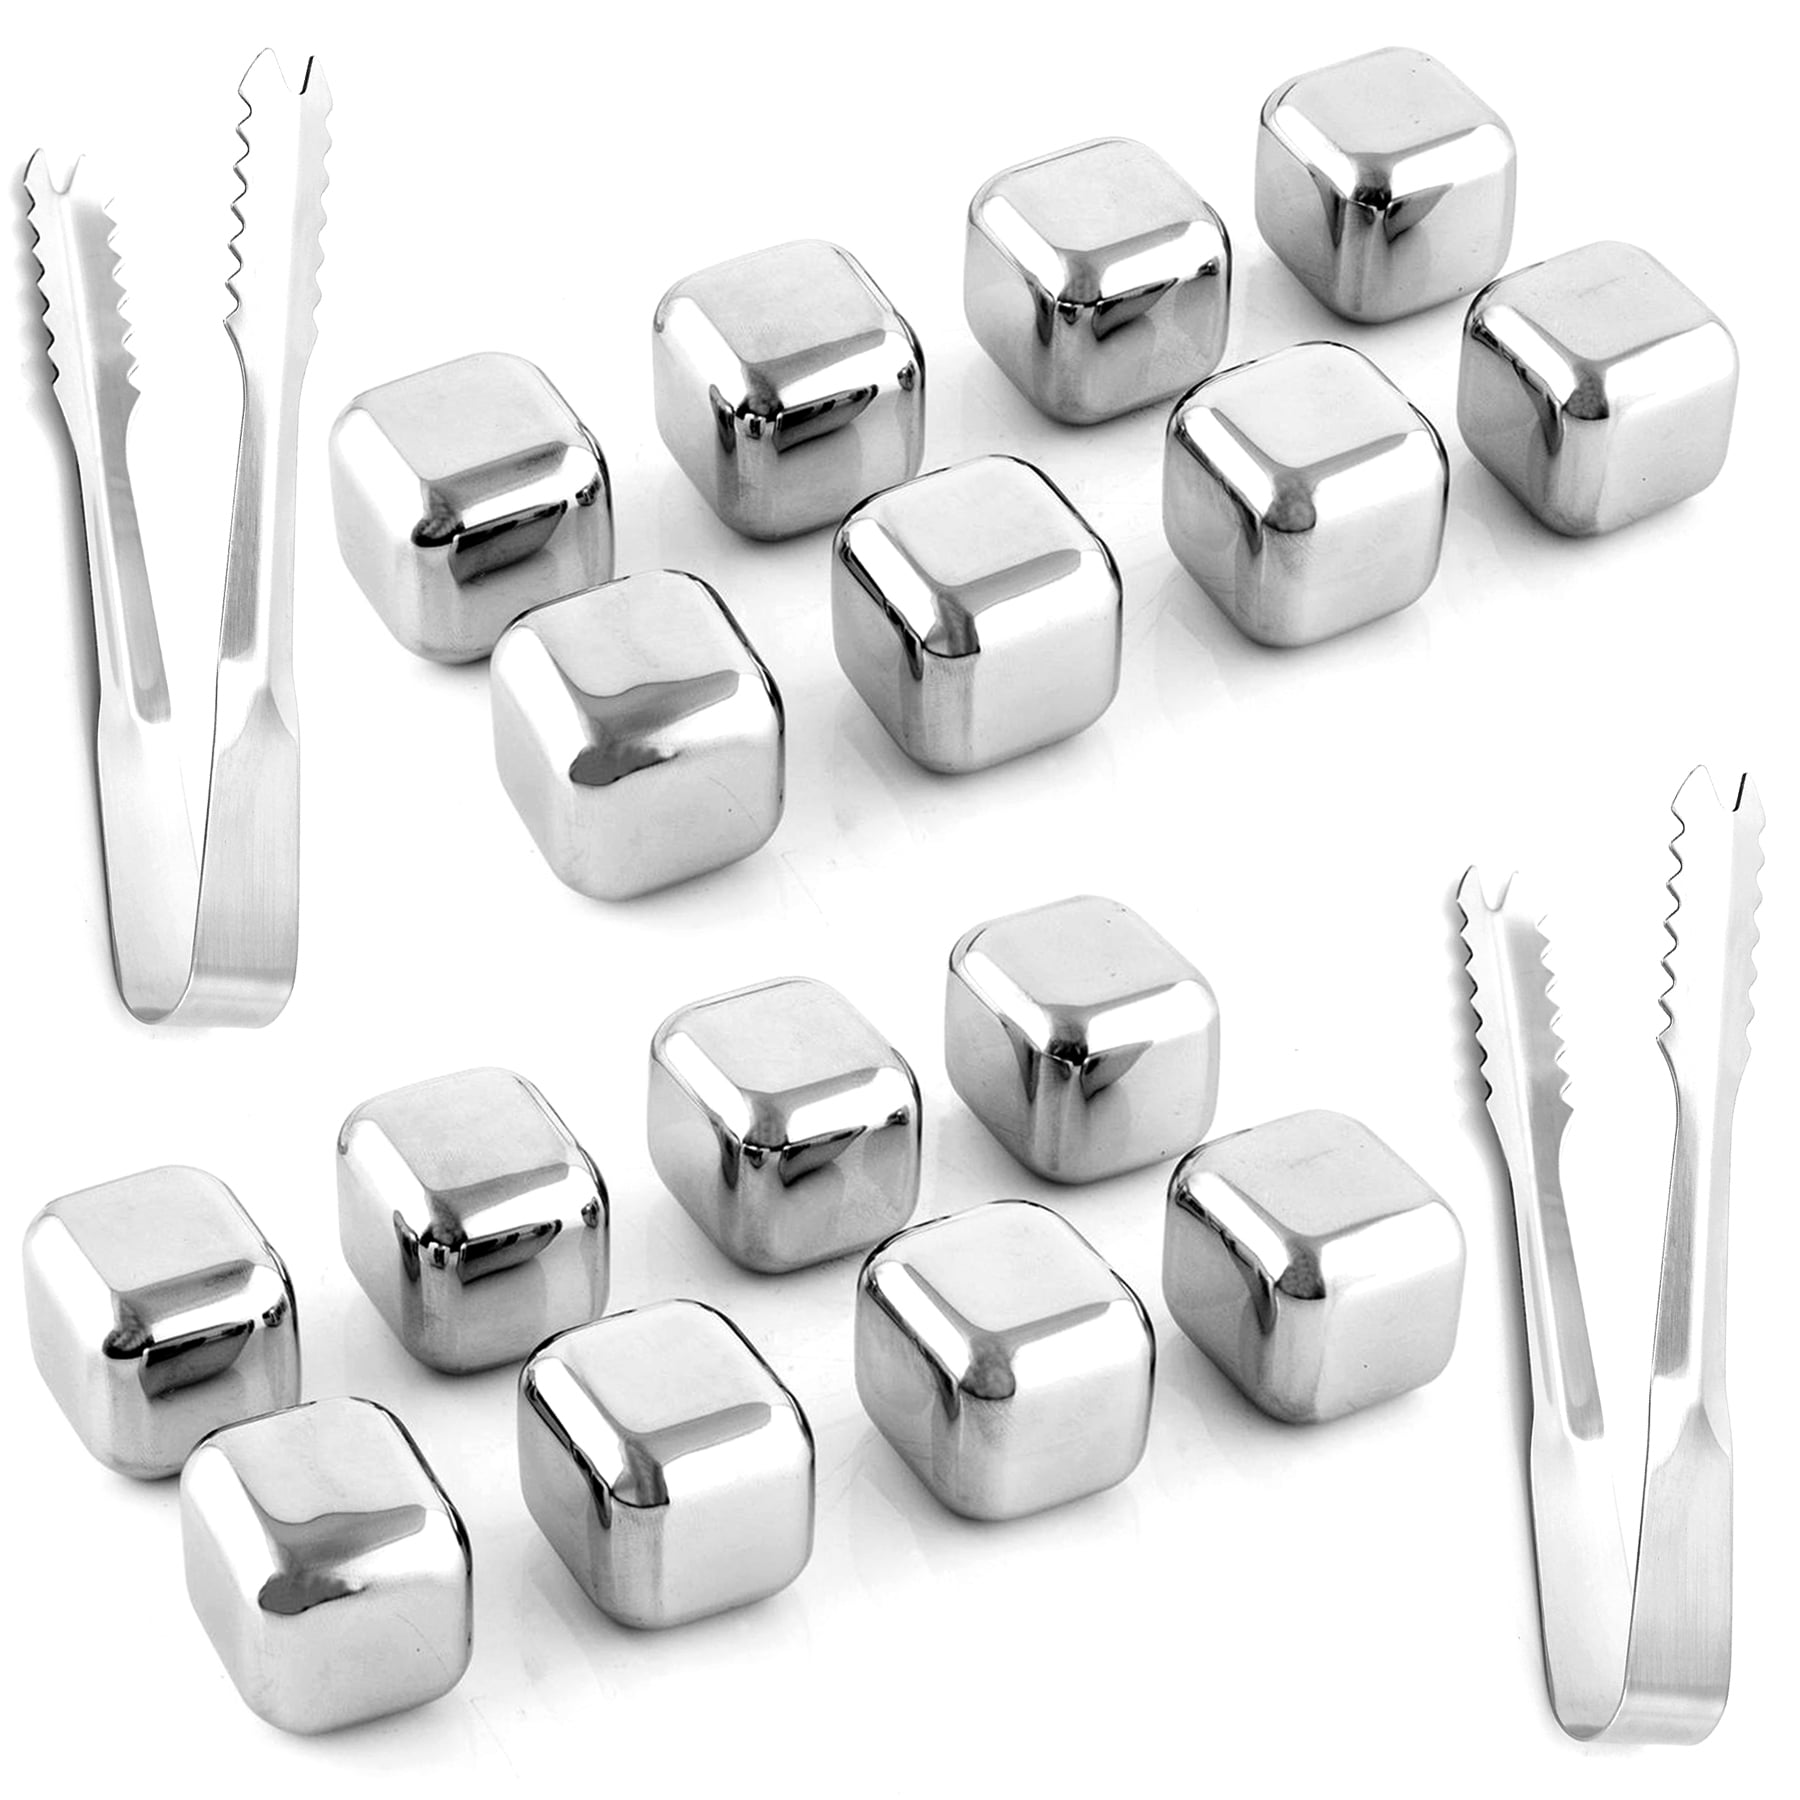 Details about   8PC Stainless Steel Ice Cubes Chilling Stones Rocks Reusable with Tong 